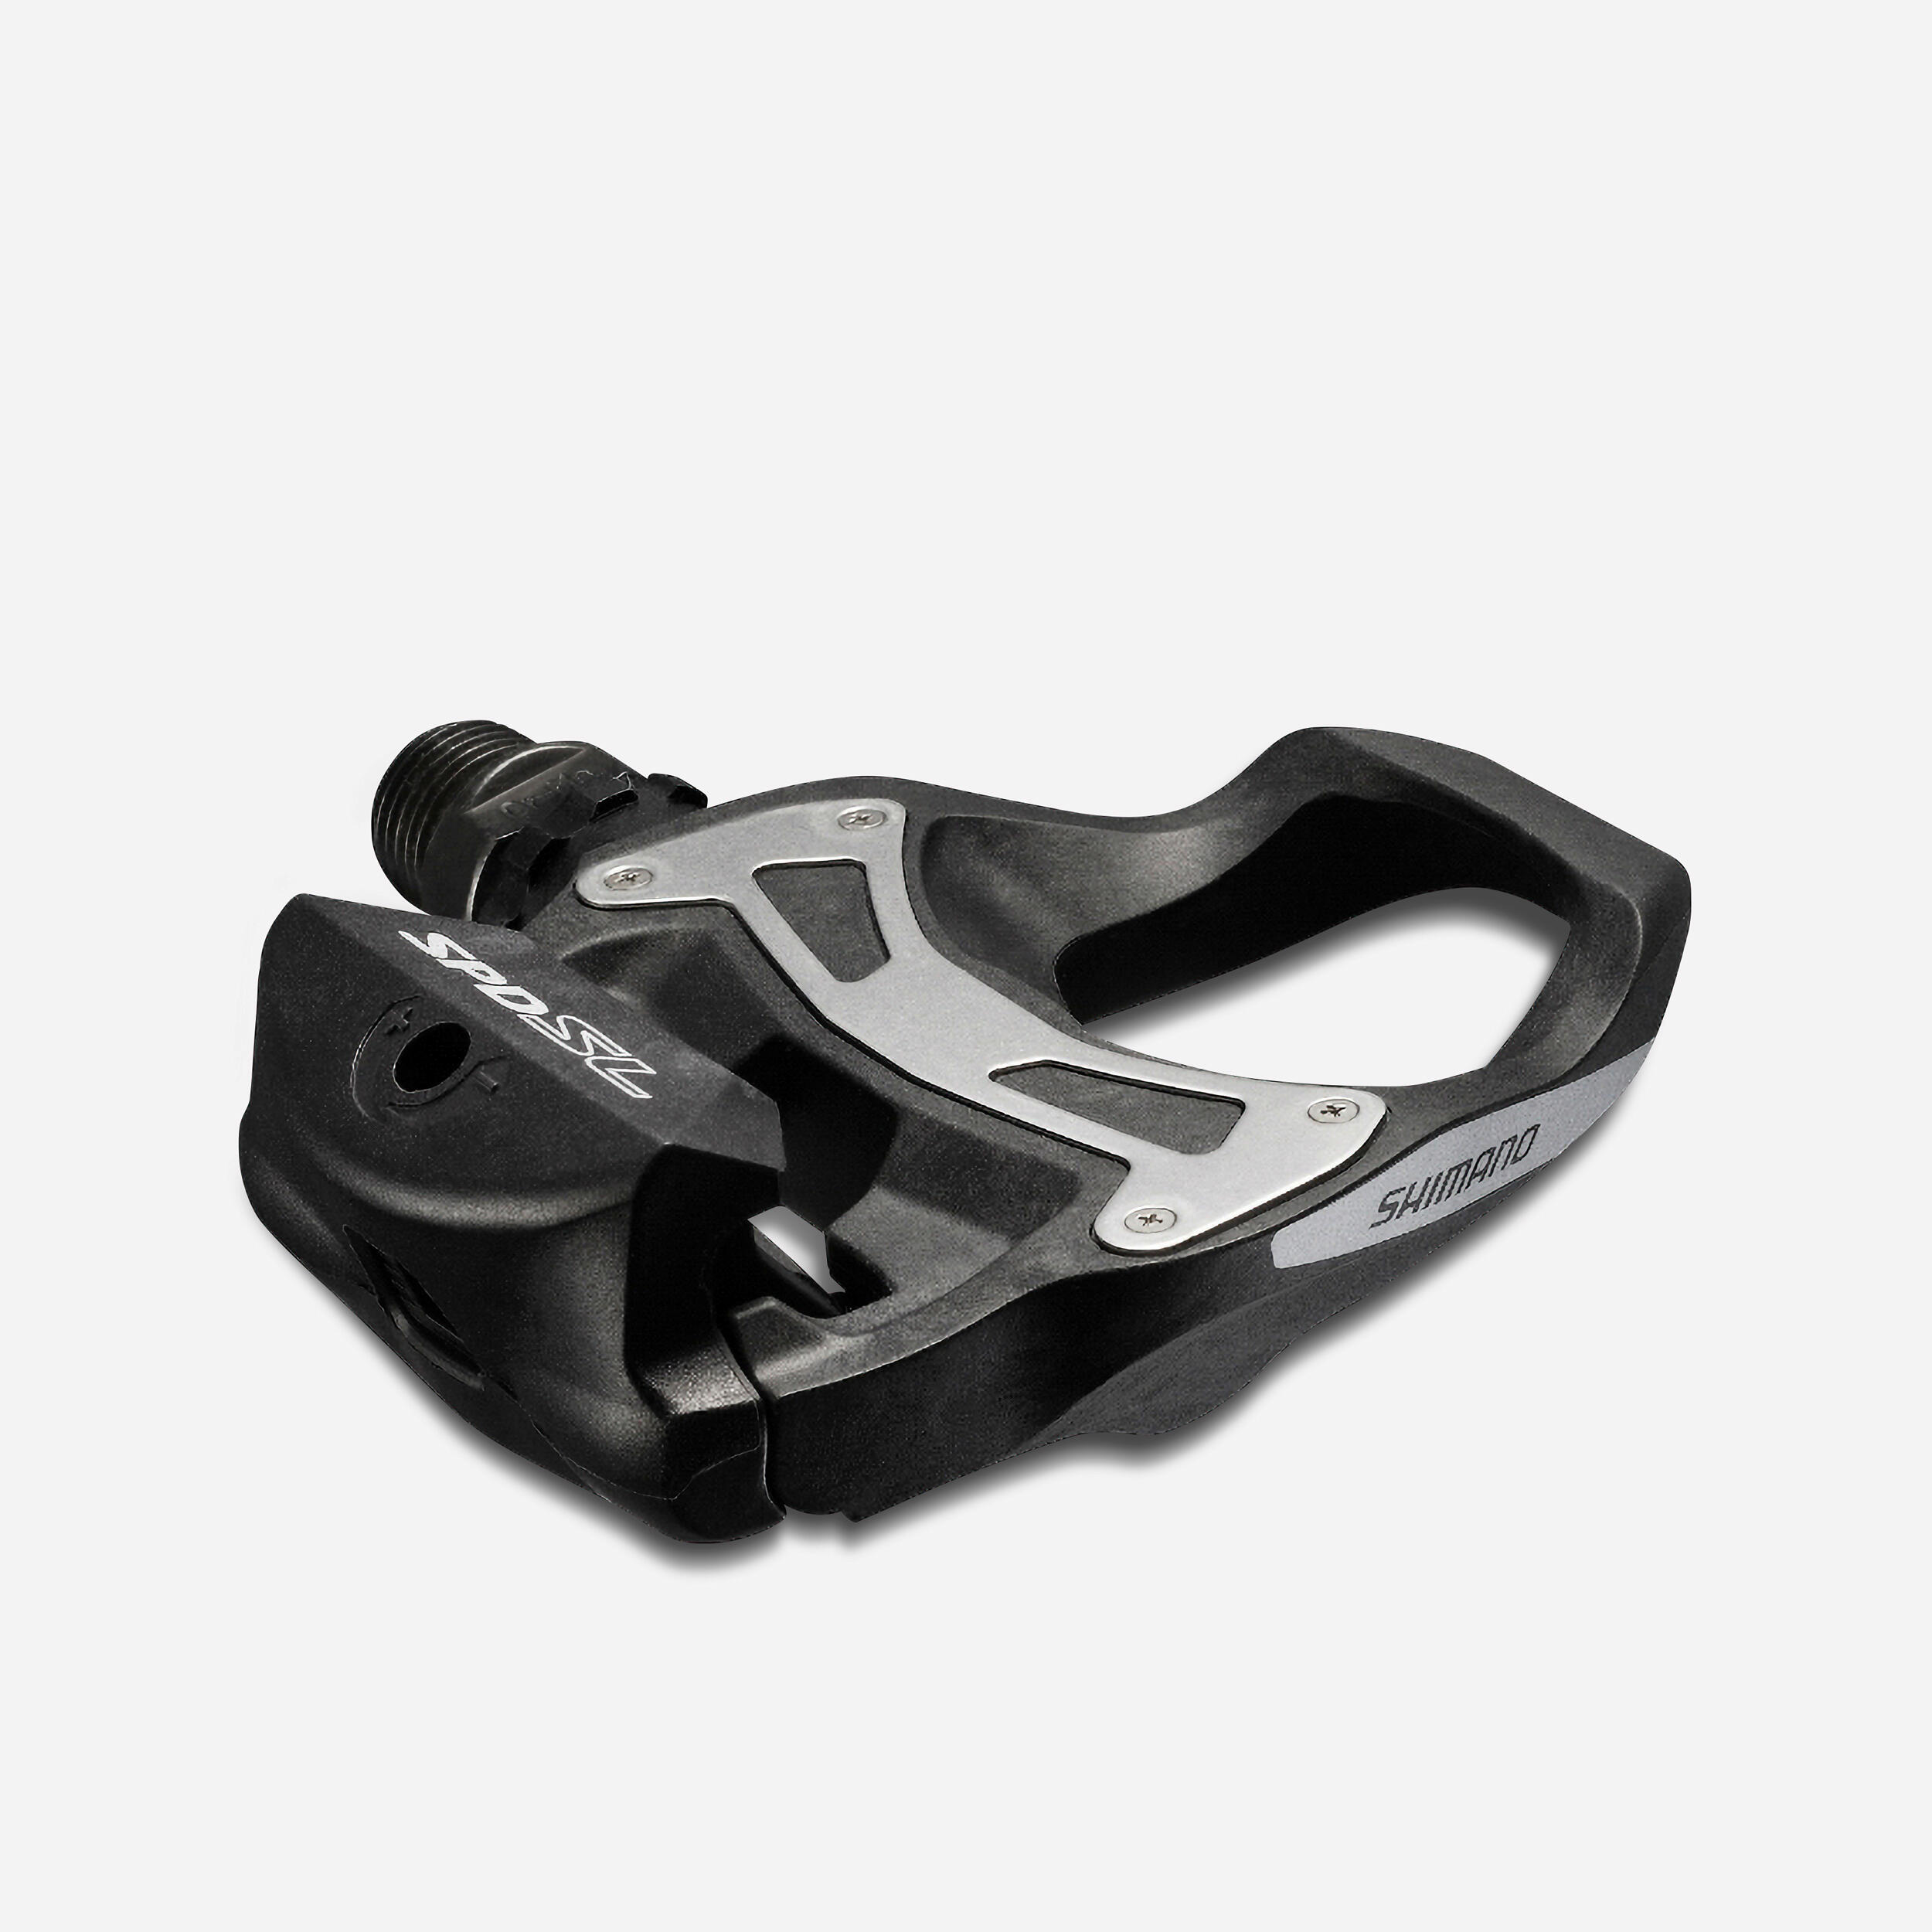 SHIMANO Pair of Pedals PD-R550 SPD SL - Black